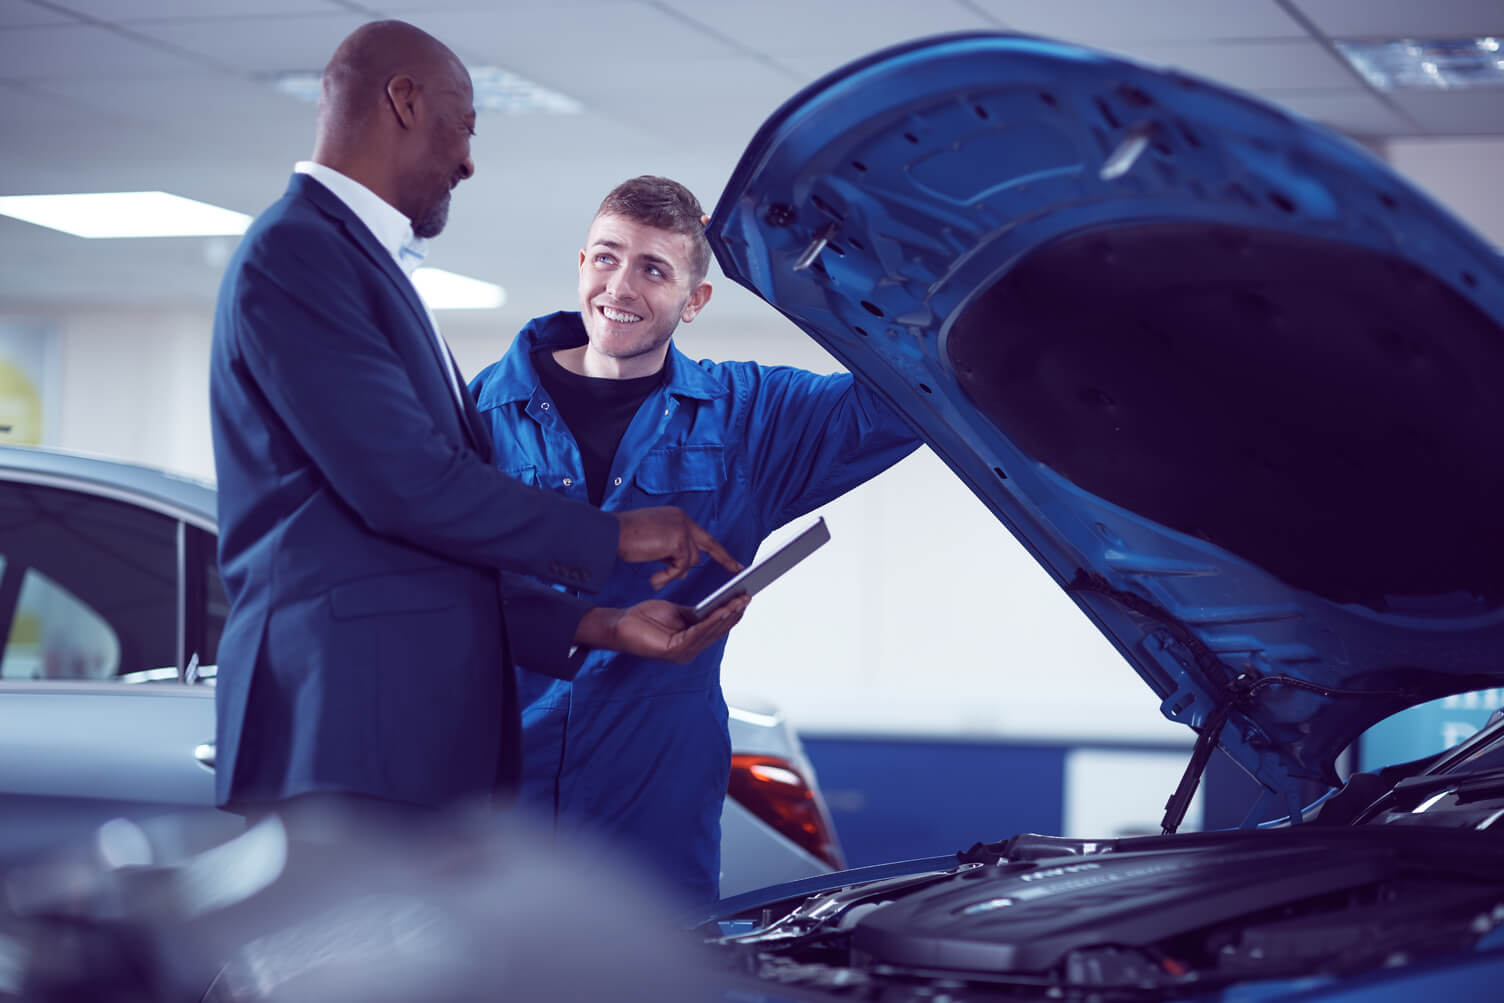 Customer and mechanic looking under the hood of a car.